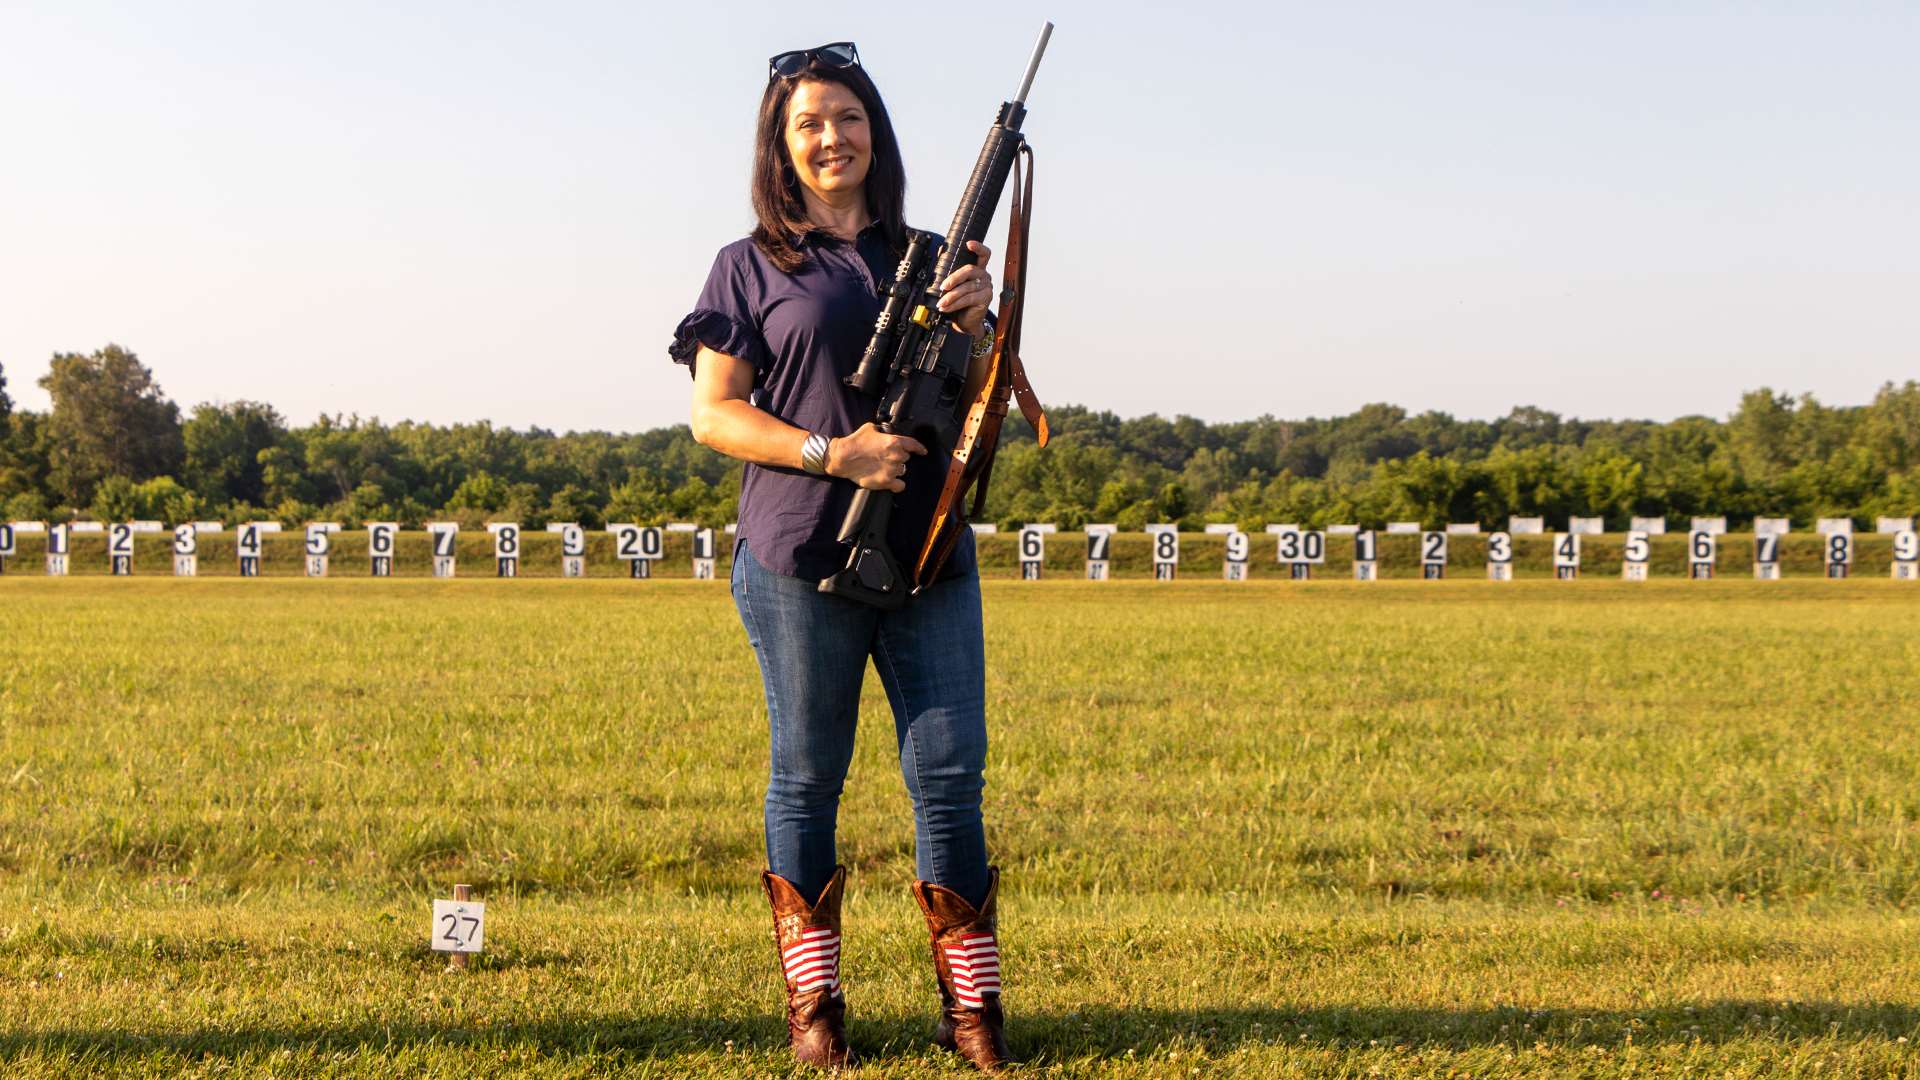 Janet Holcomb with AR-15